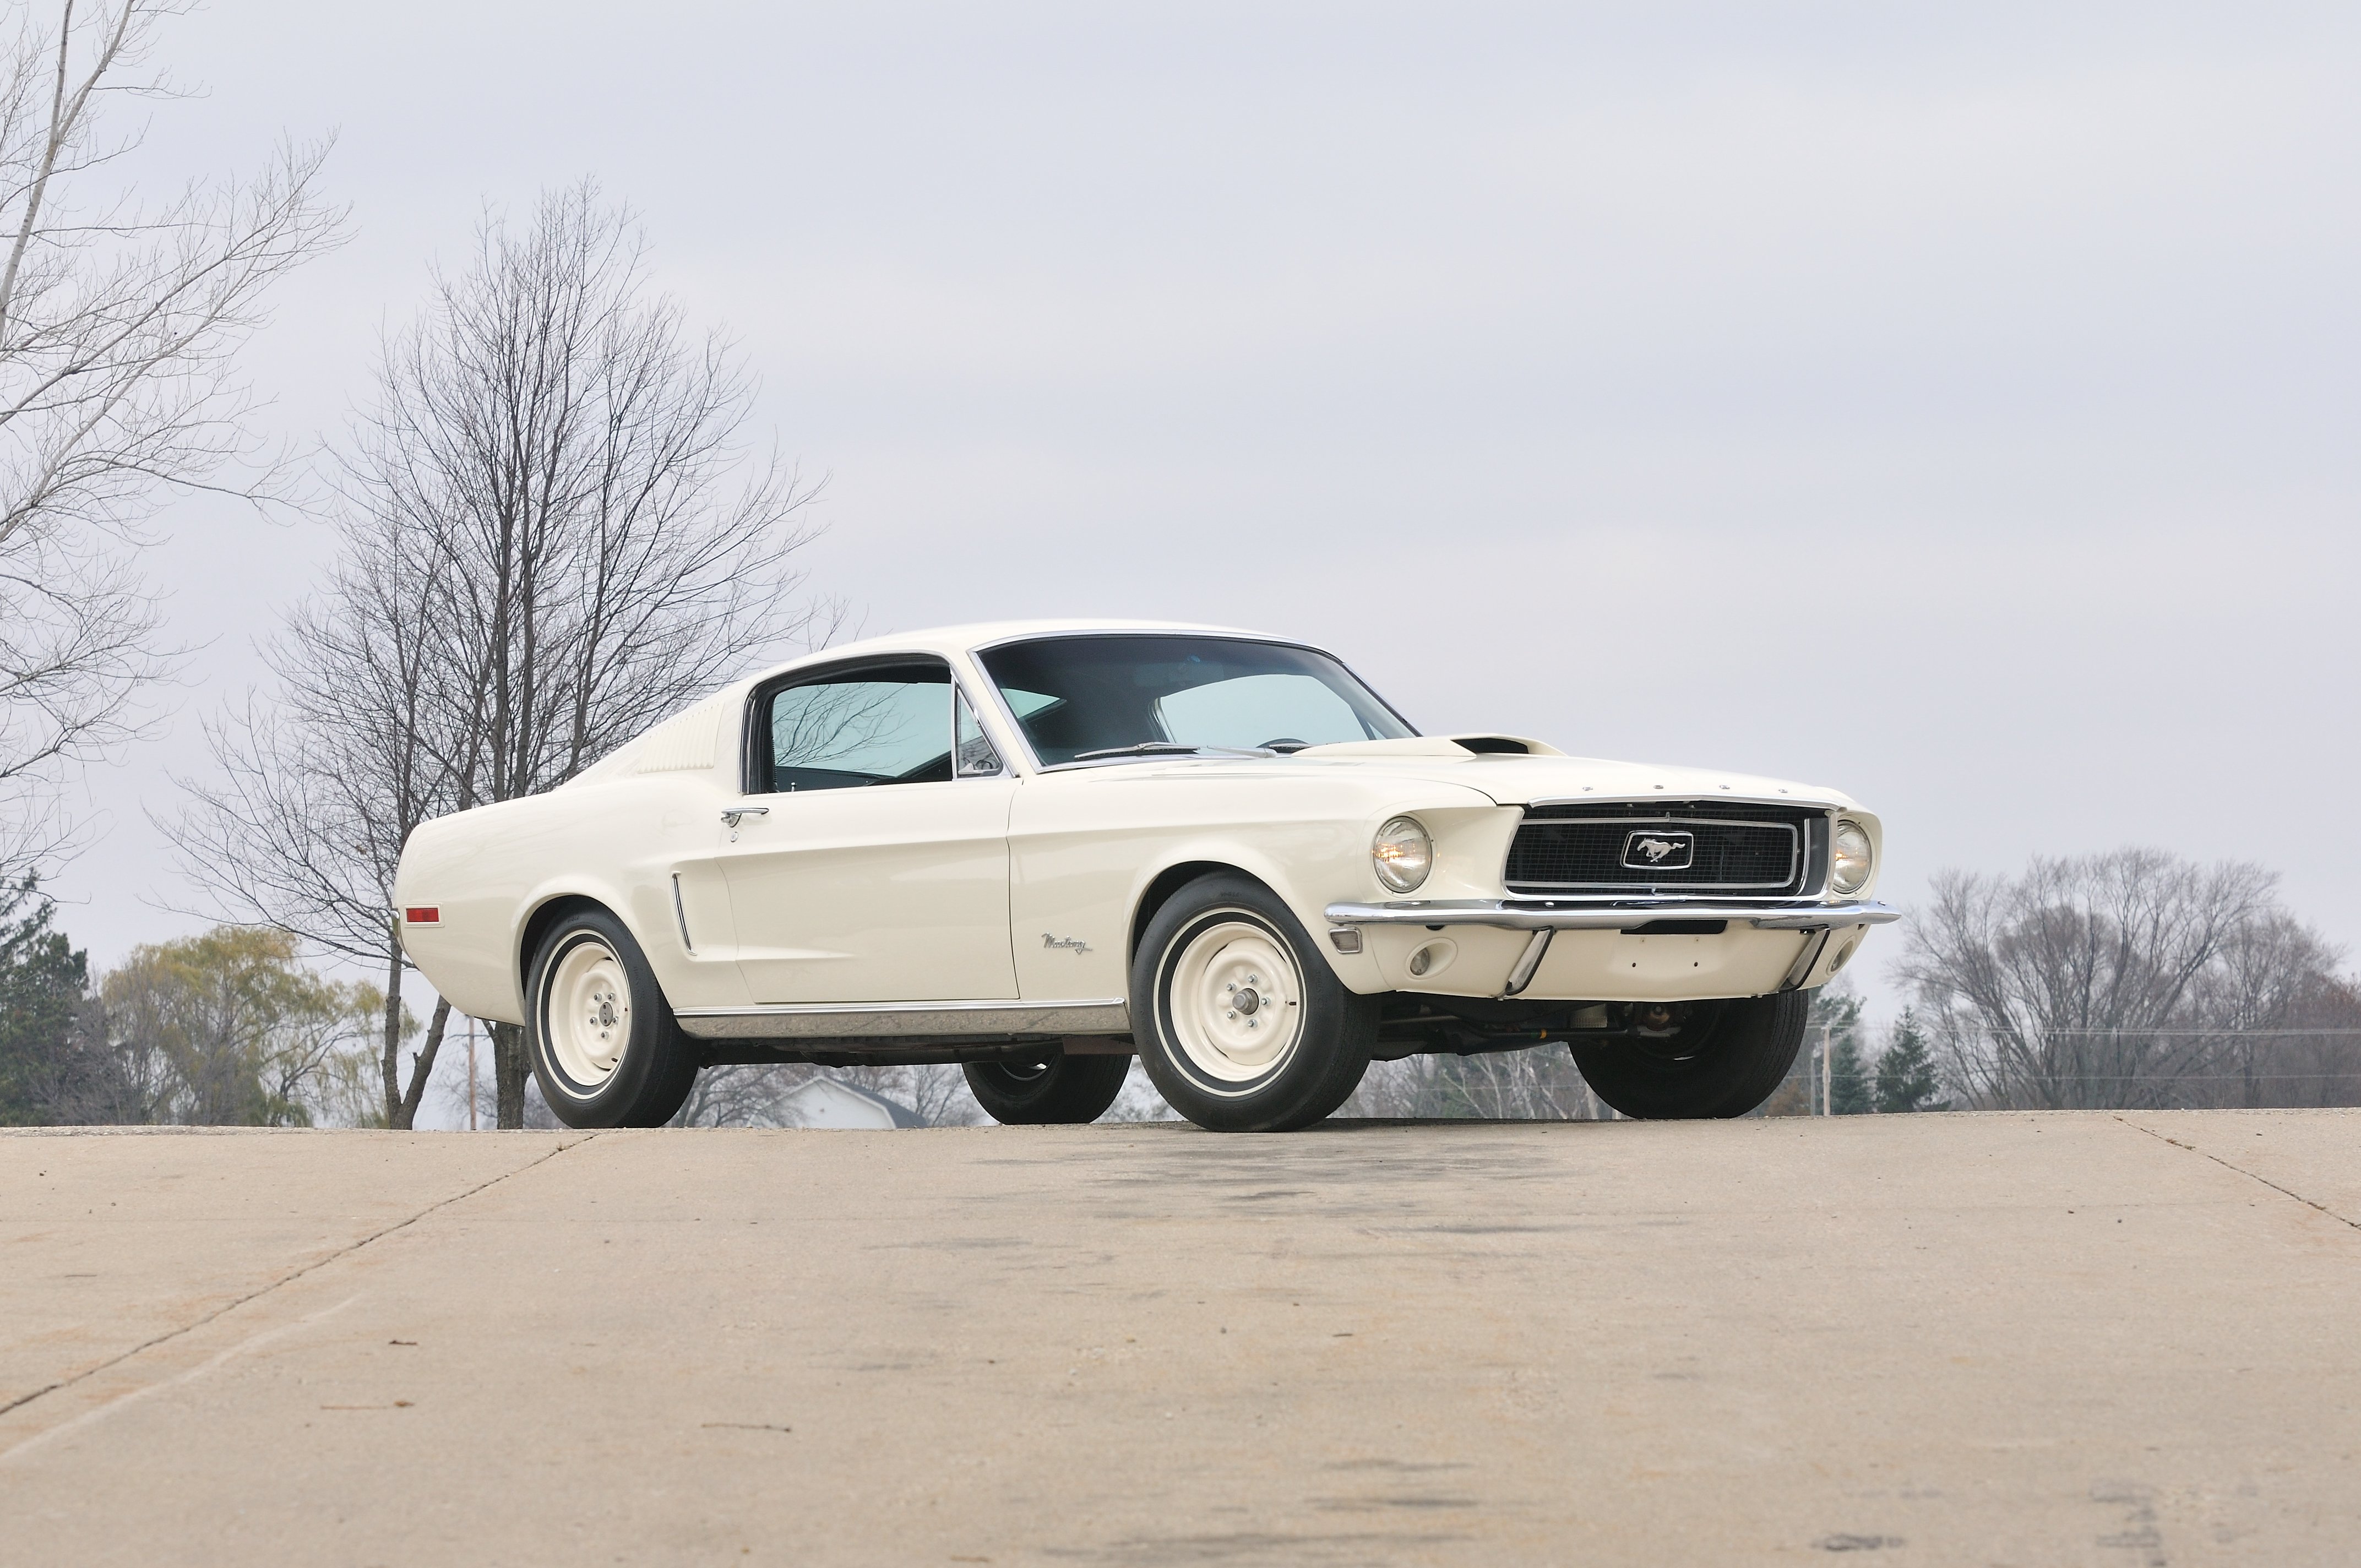 1968, Ford, Mustang, Lightweight, White, Muscle, Classic, Old, Usa, 4288x2848 01 Wallpaper